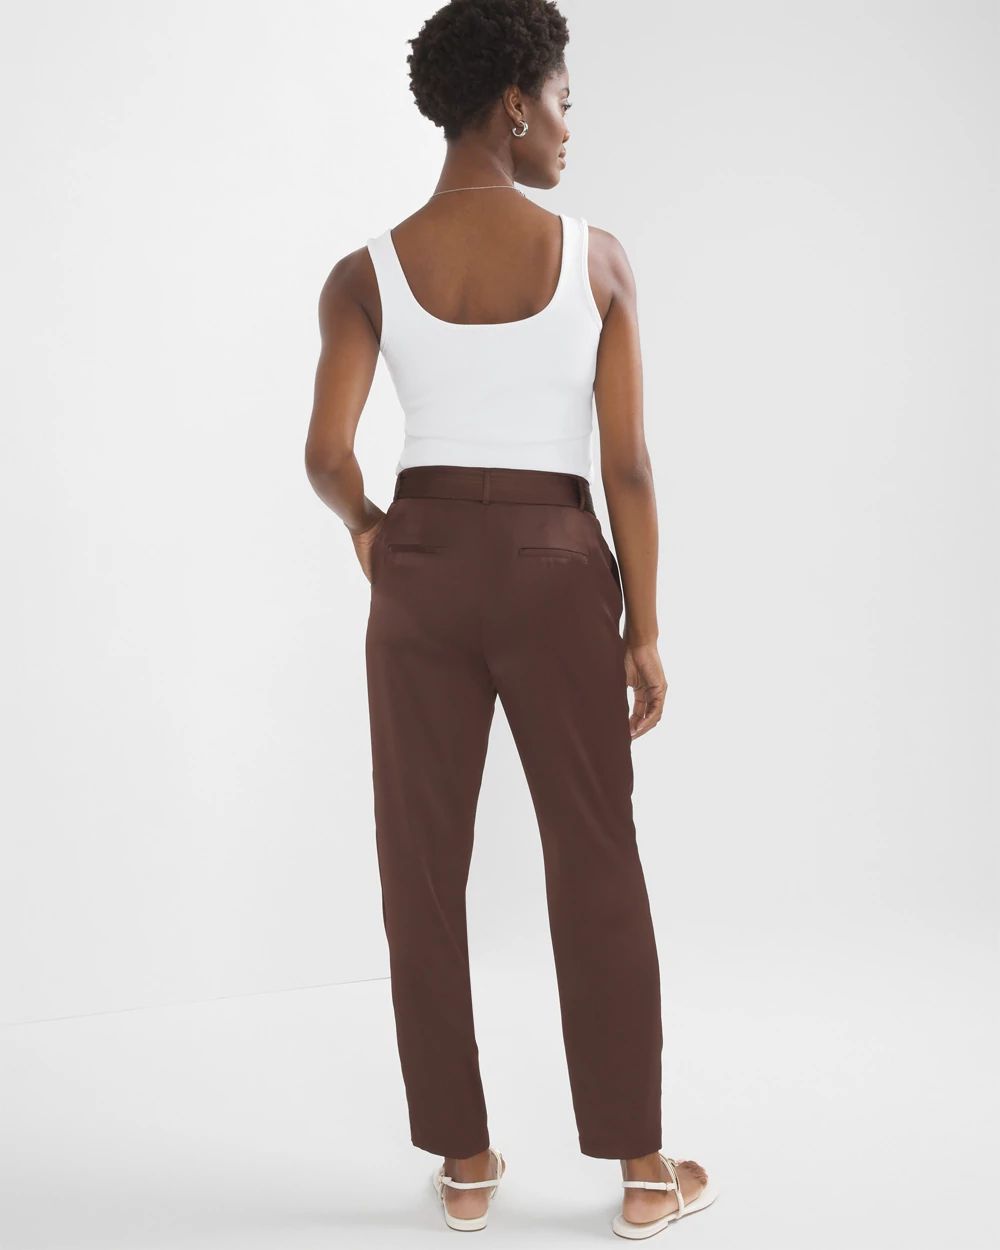 Petite Belted Utility Straight Crop Pants click to view larger image.